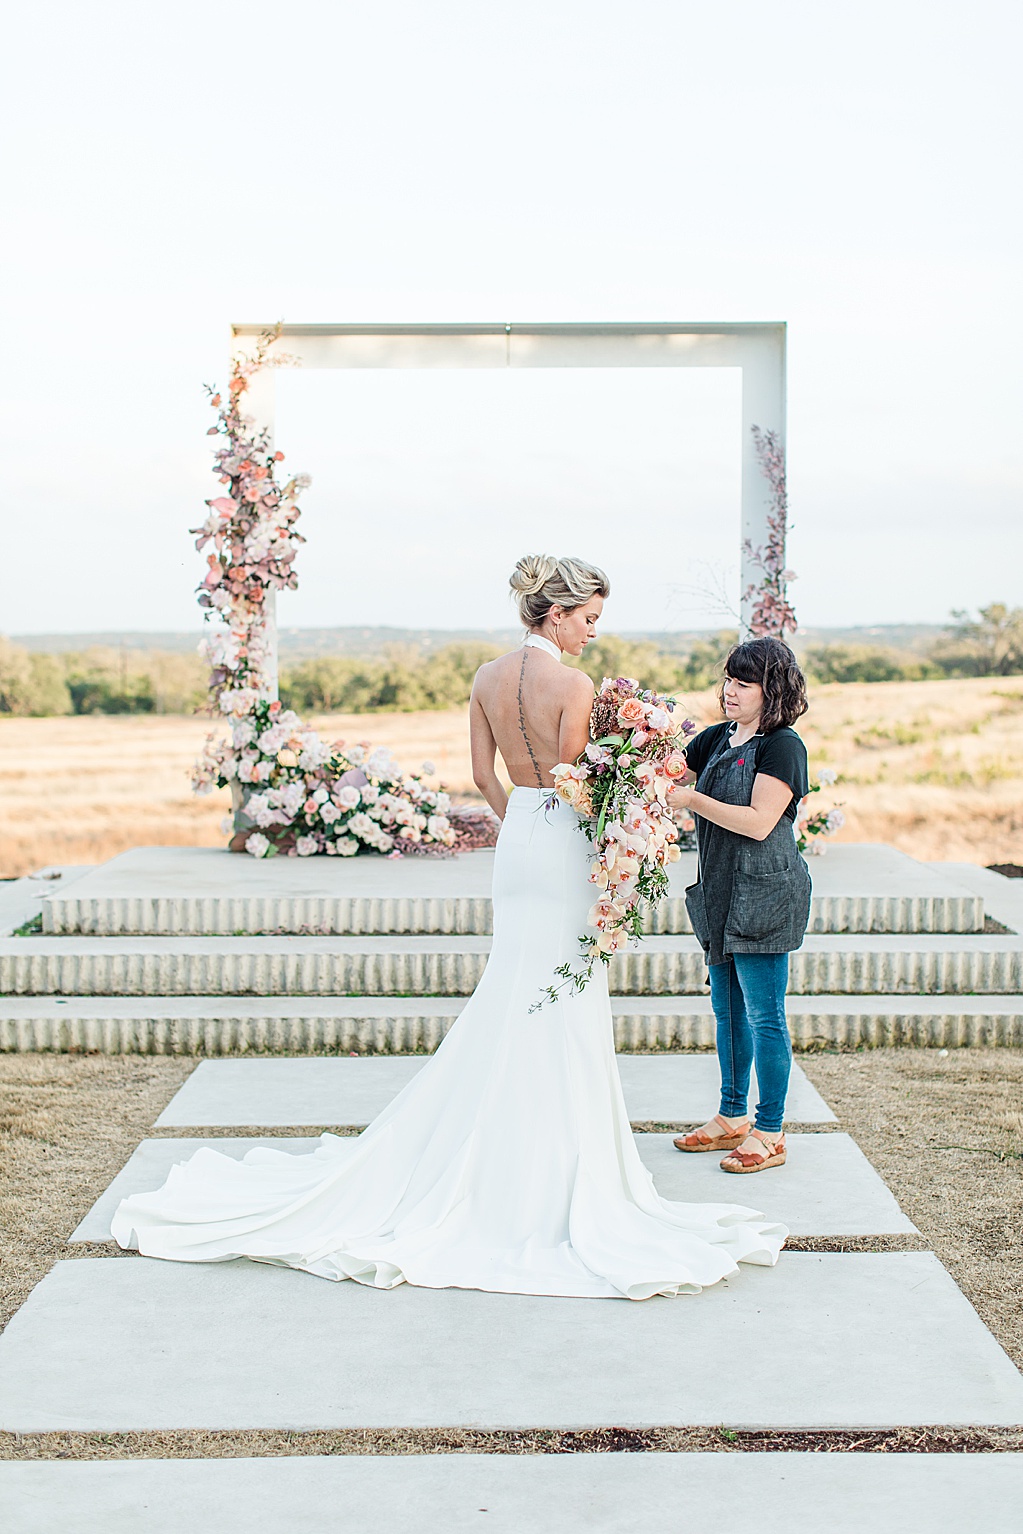 Blush mauve peach and coral wedding inspiration at Prospect House in Dripping Springs Texas wedding venue by Allison Jeffers Photography 0042